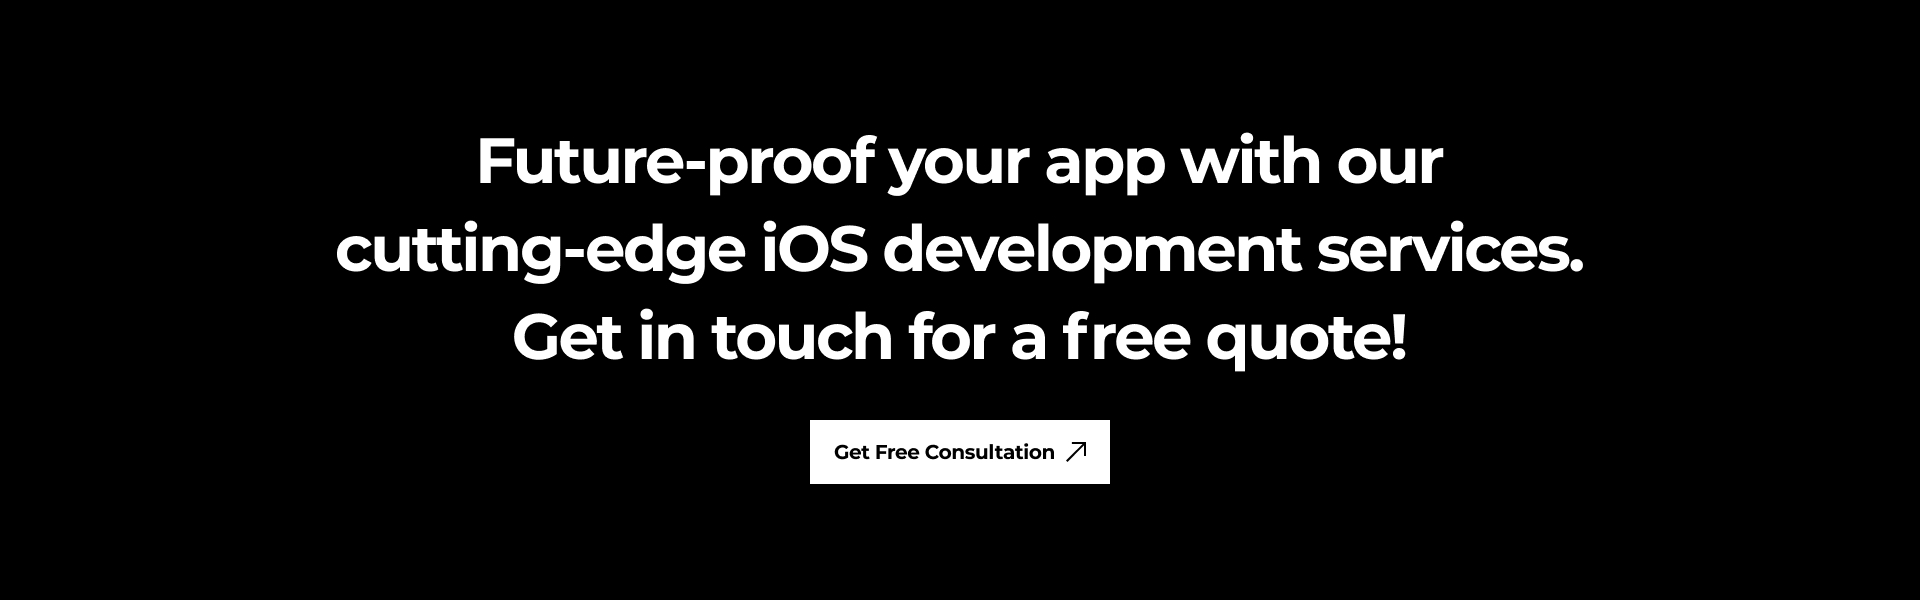 Future-proof your app with our cutting-edge iOS development services. Get in touch for a free quote!